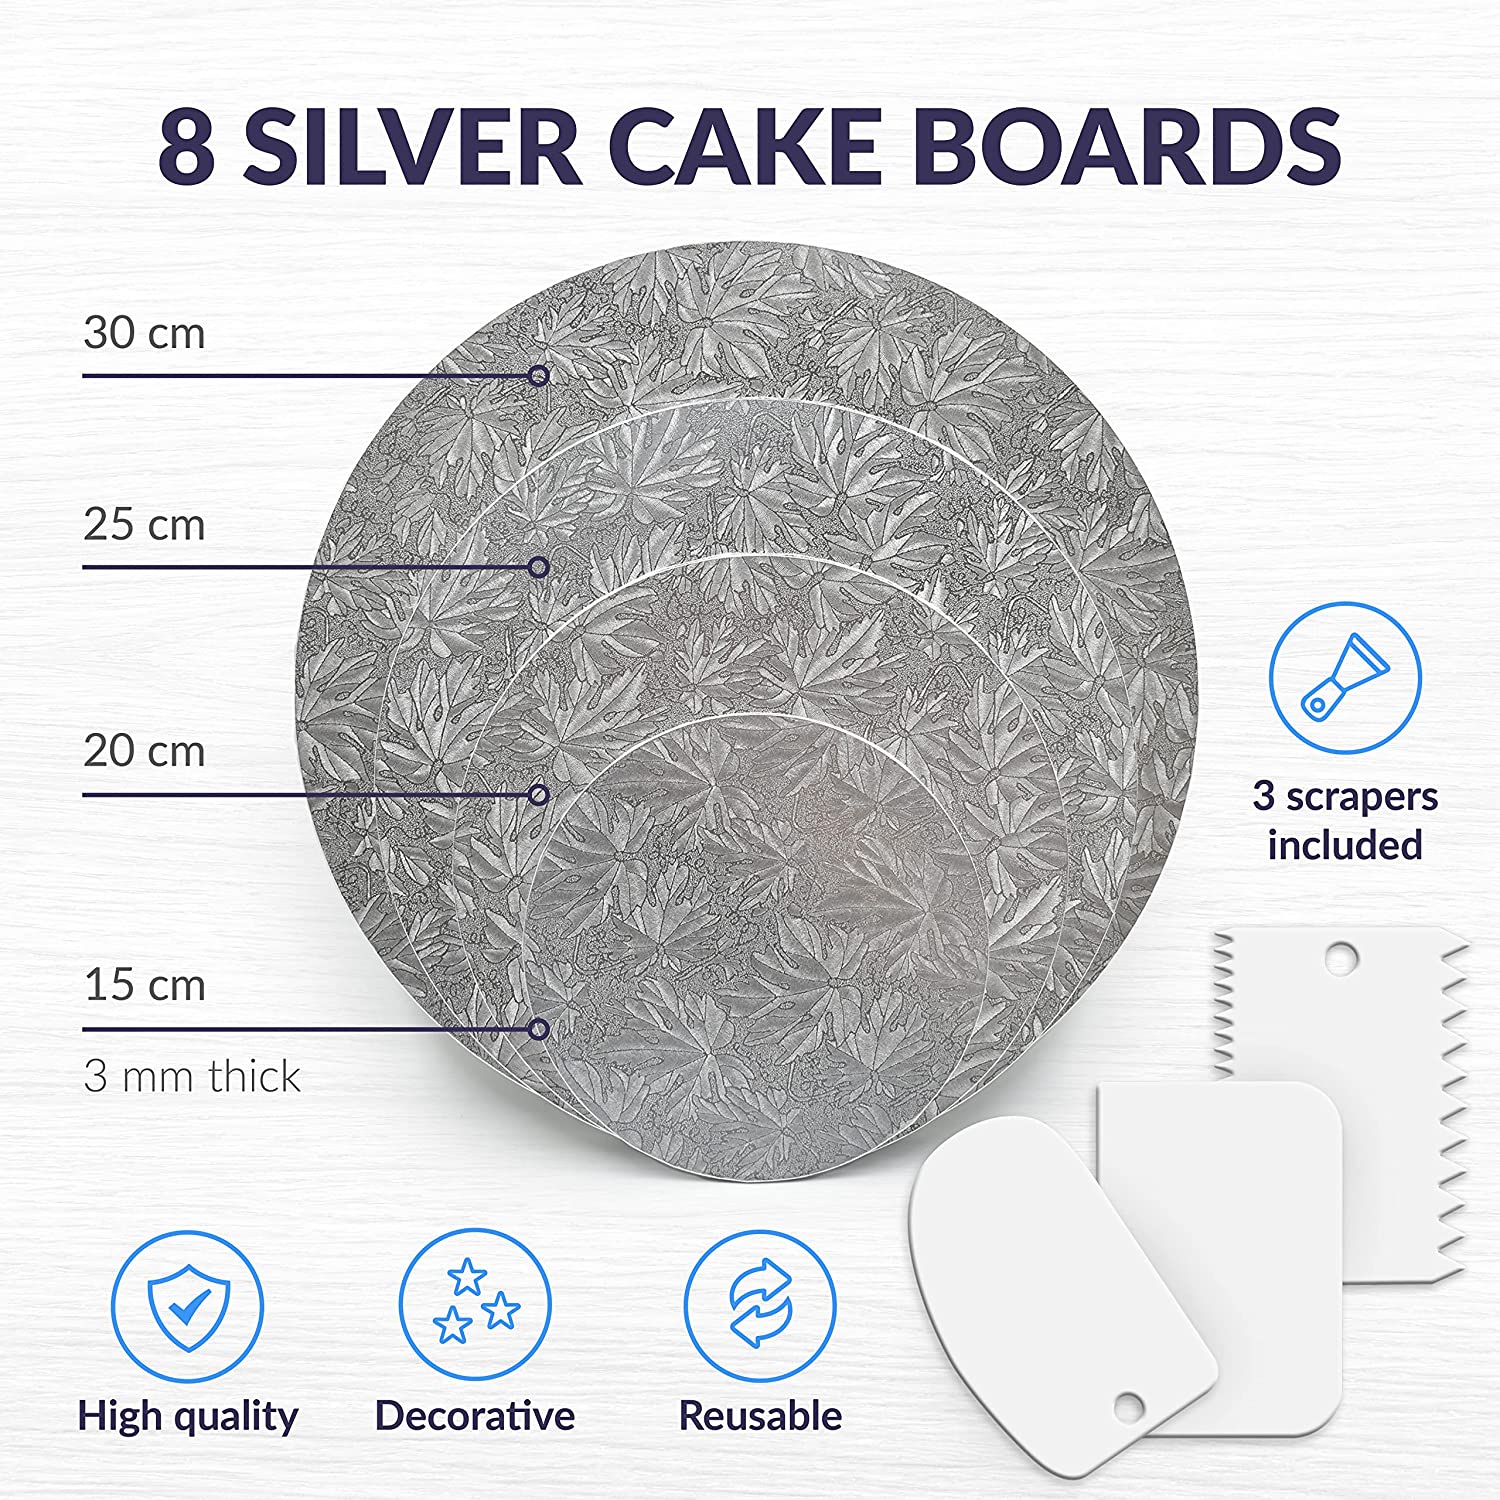 Cake Board Product Feature